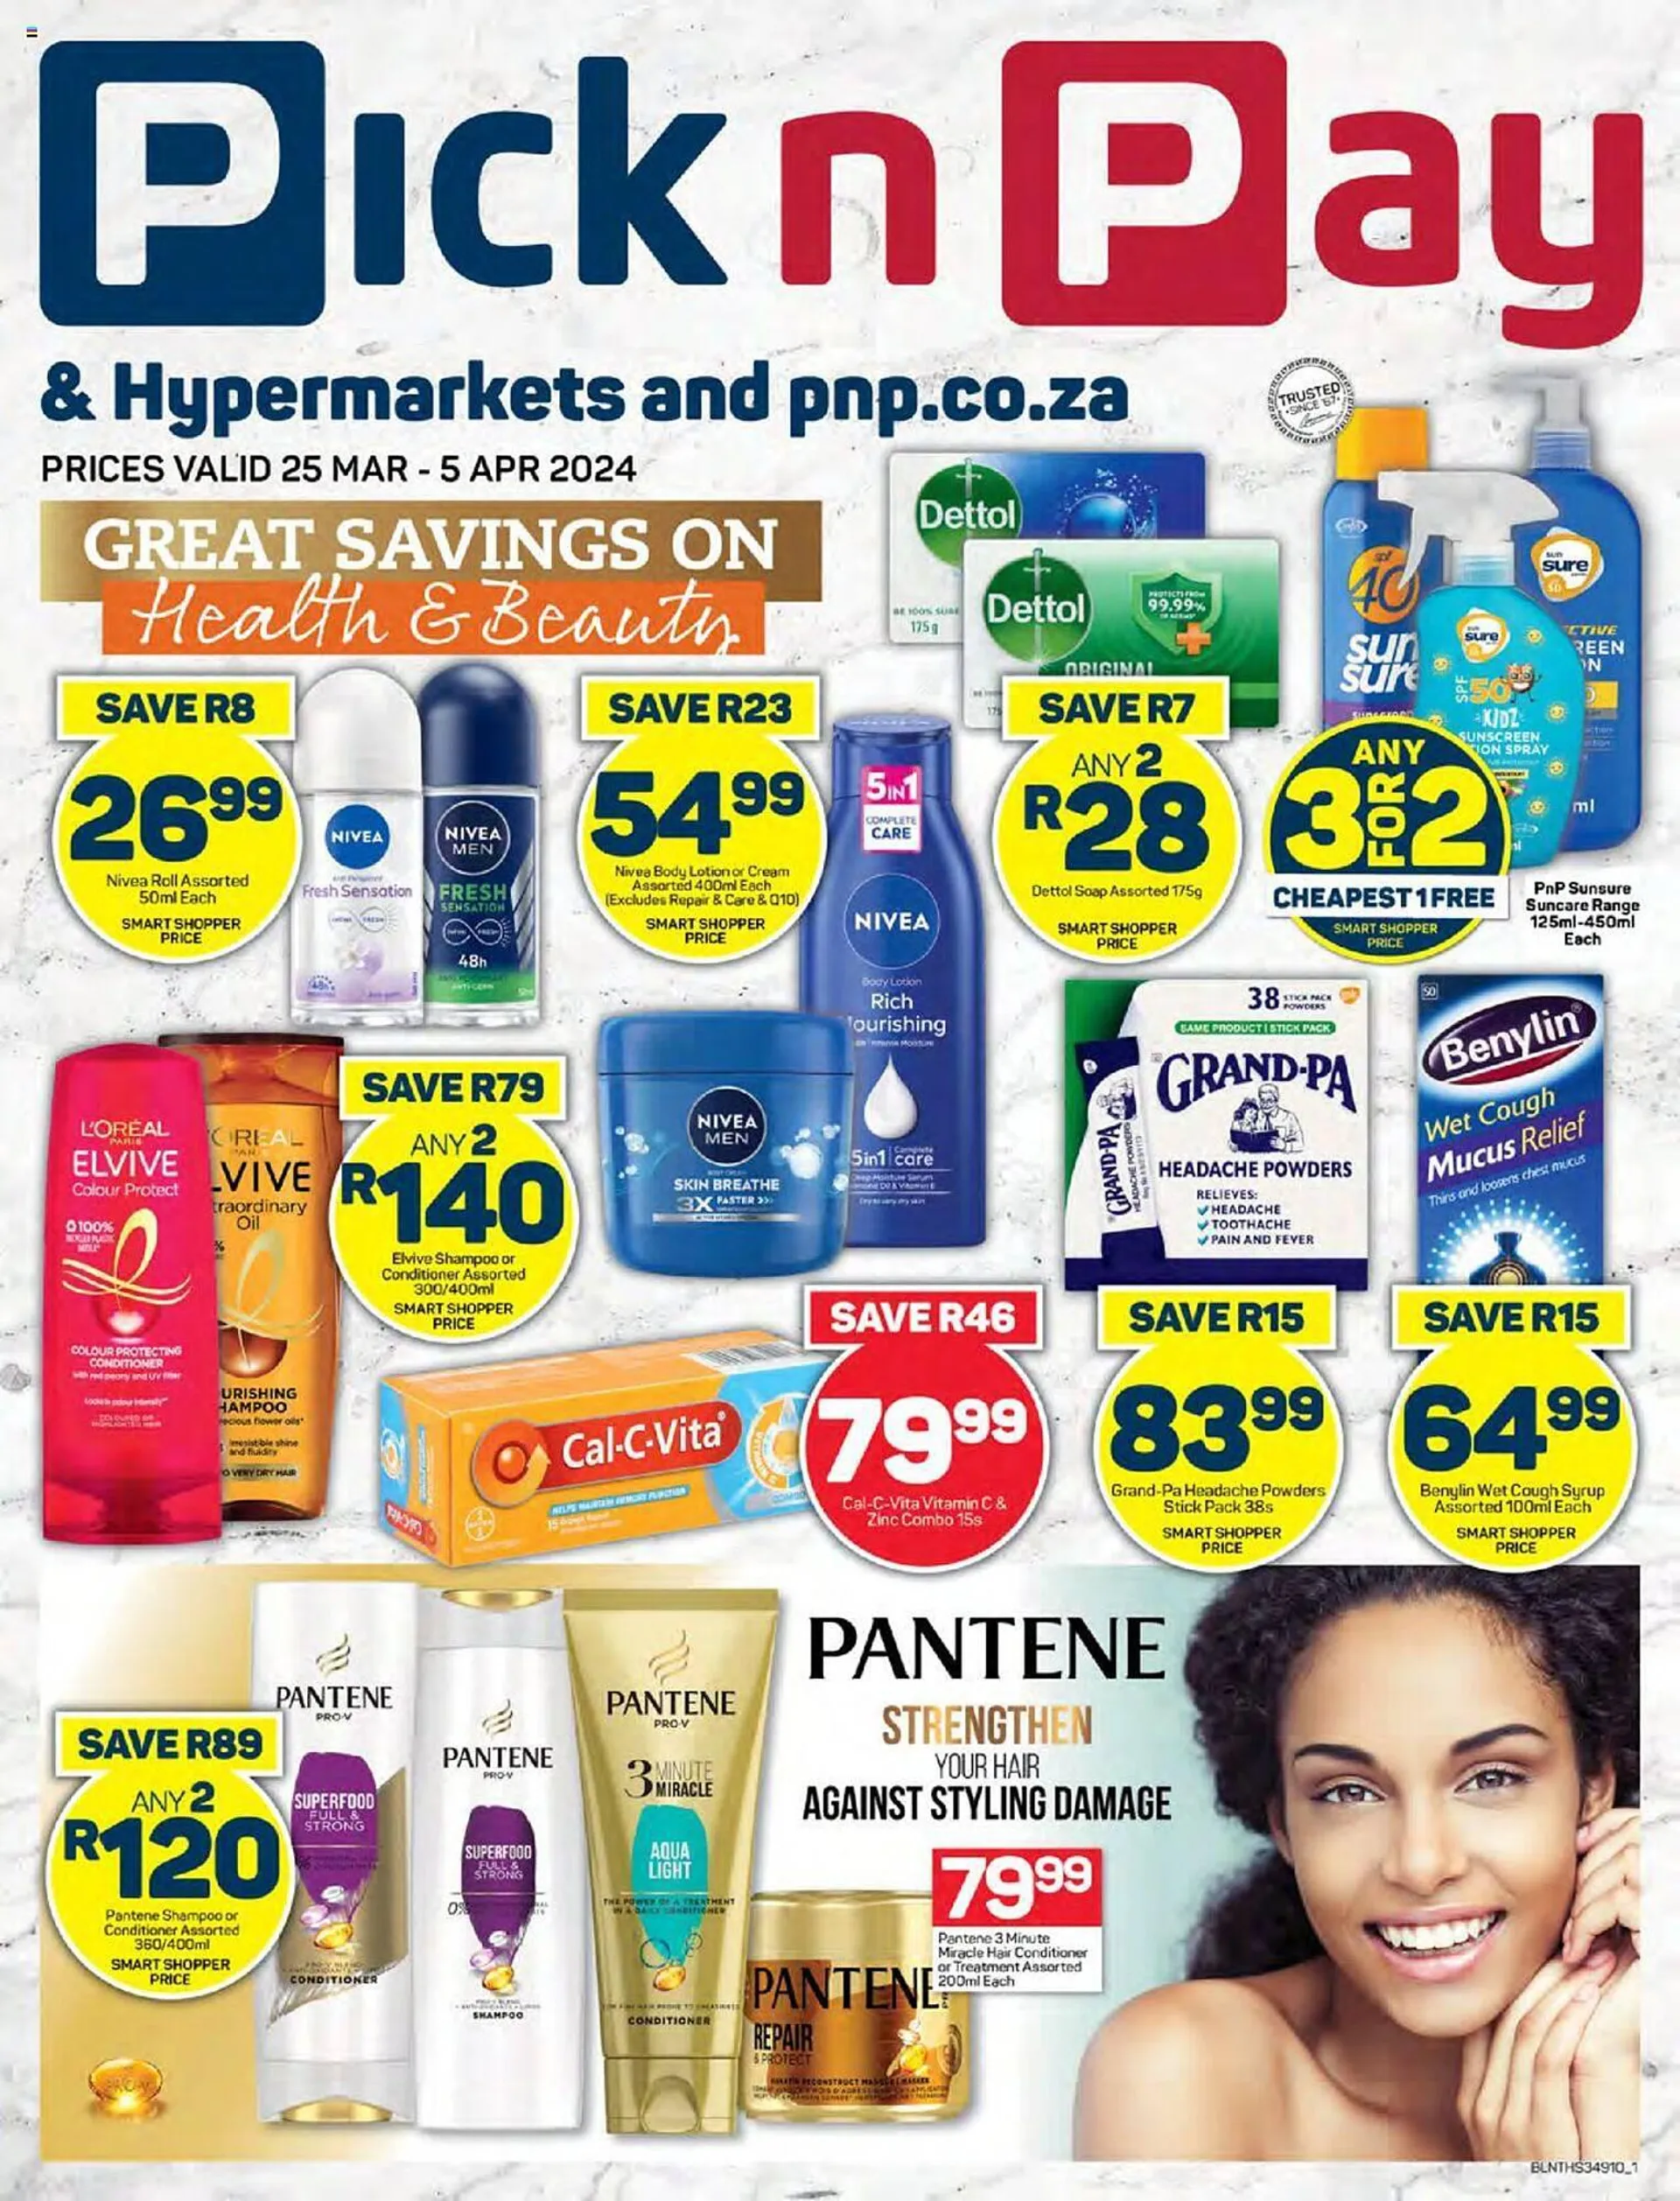 Pick n Pay catalogue - 25 March 5 April 2024 - Page 1